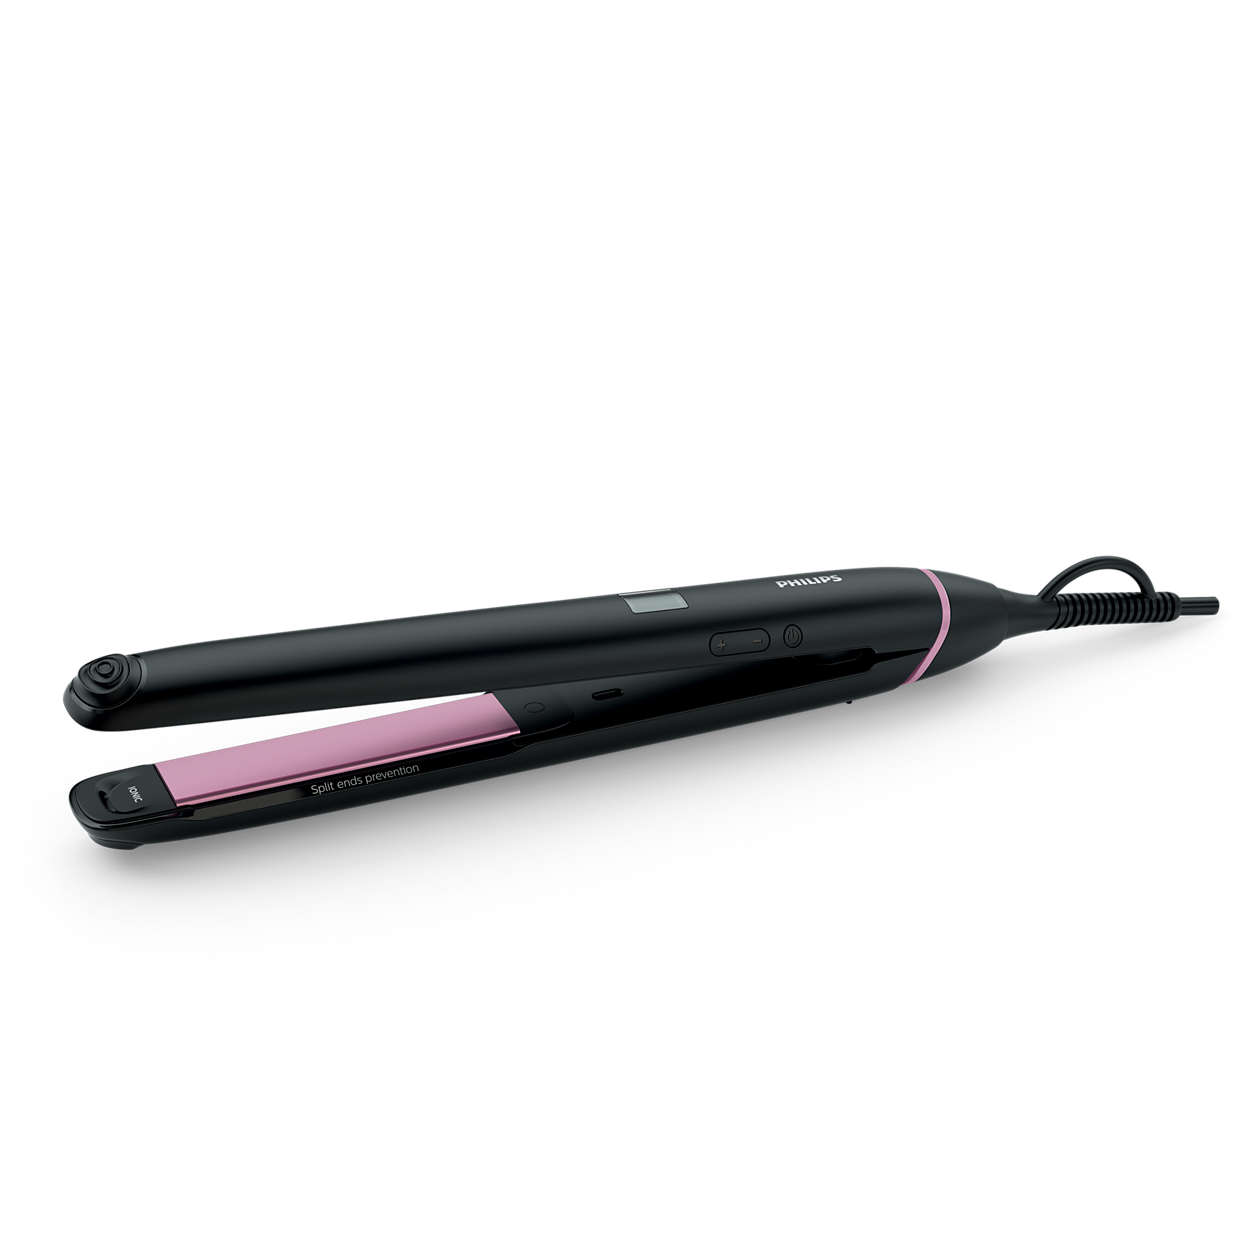 Arctic witness shave StraightCare Vivid Ends straightener BHS675/00 | Philips